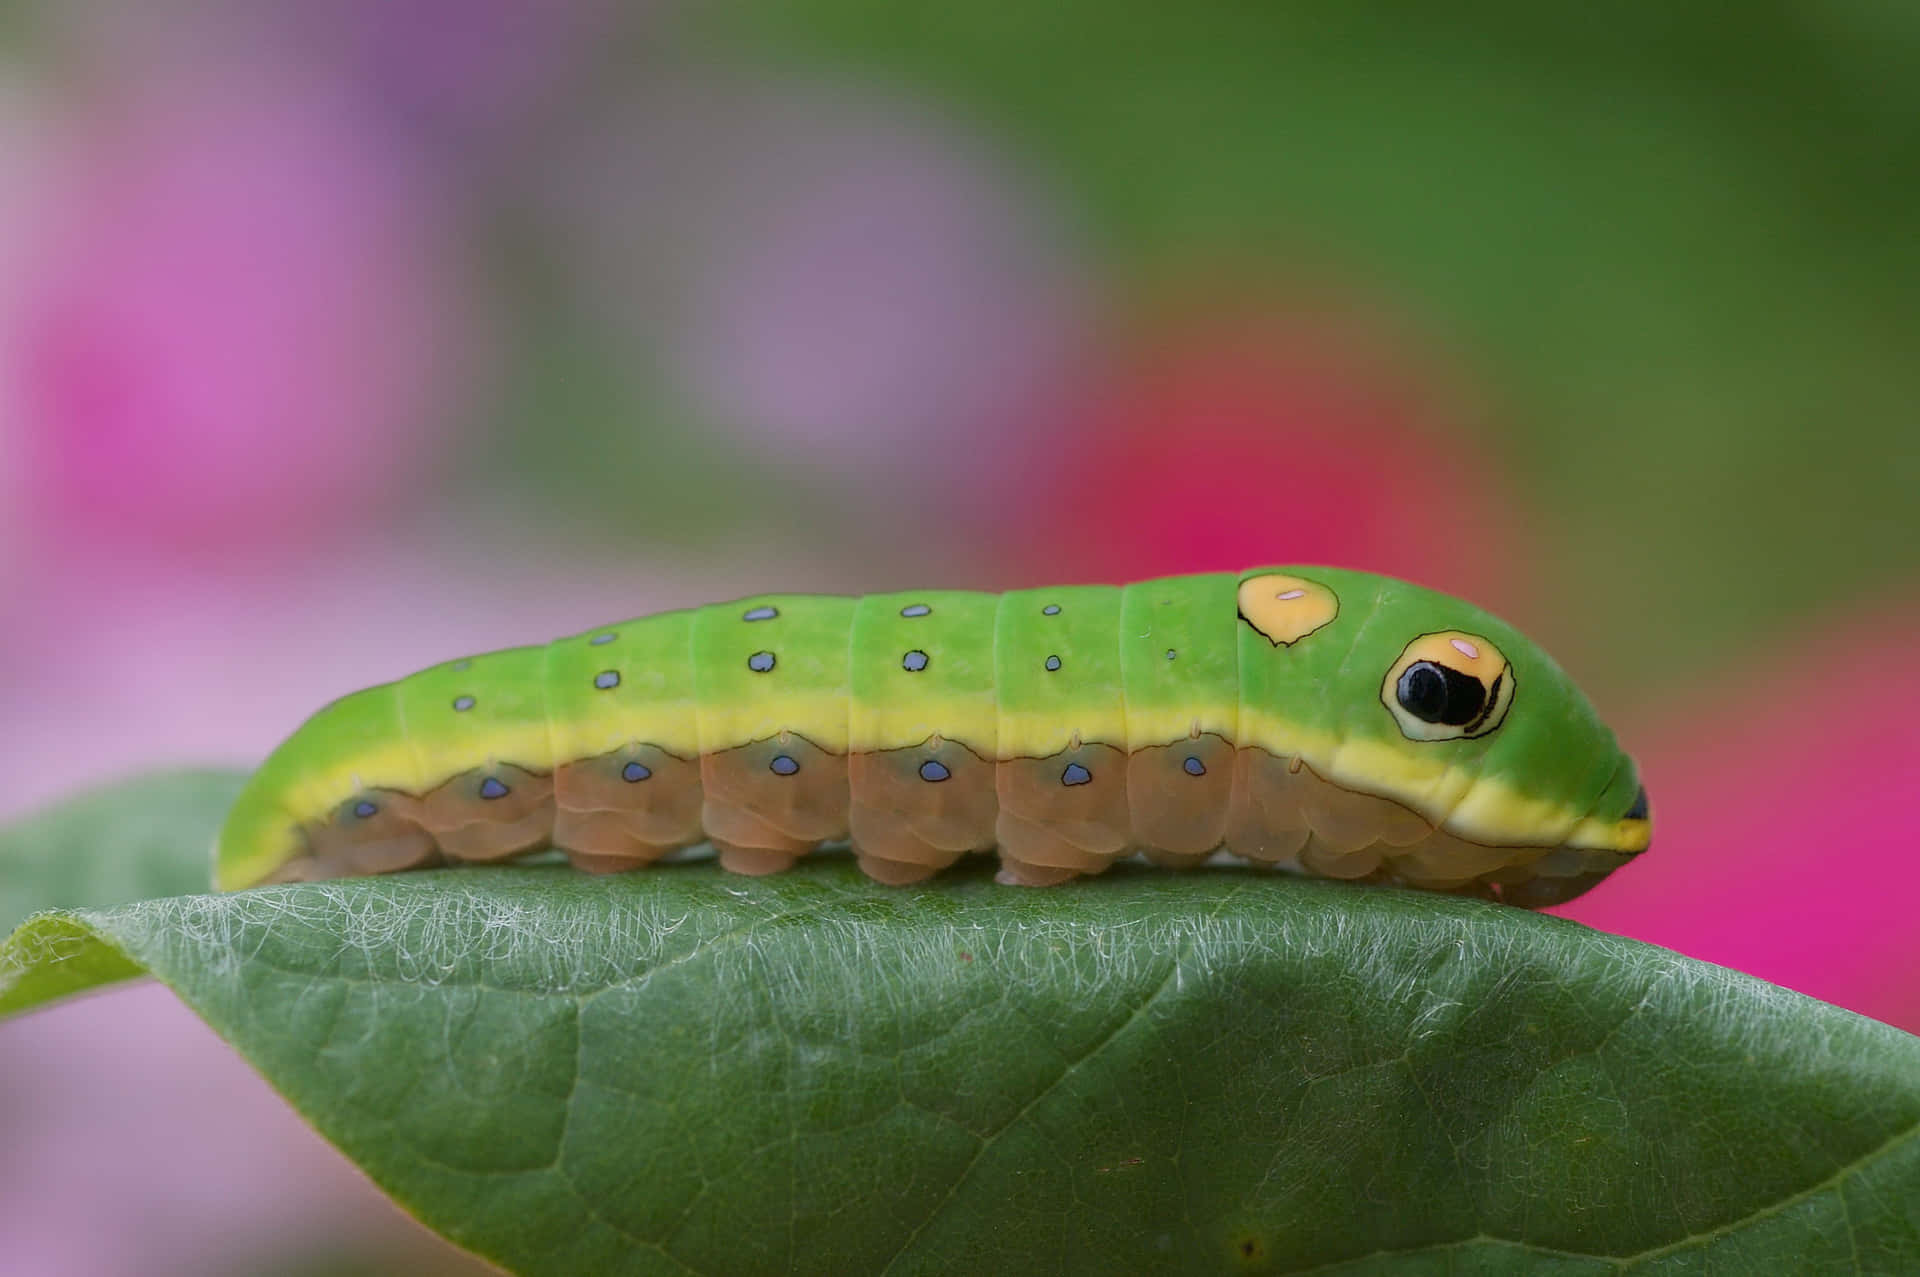 A Green Caterpillar On A Leaf With Flowers